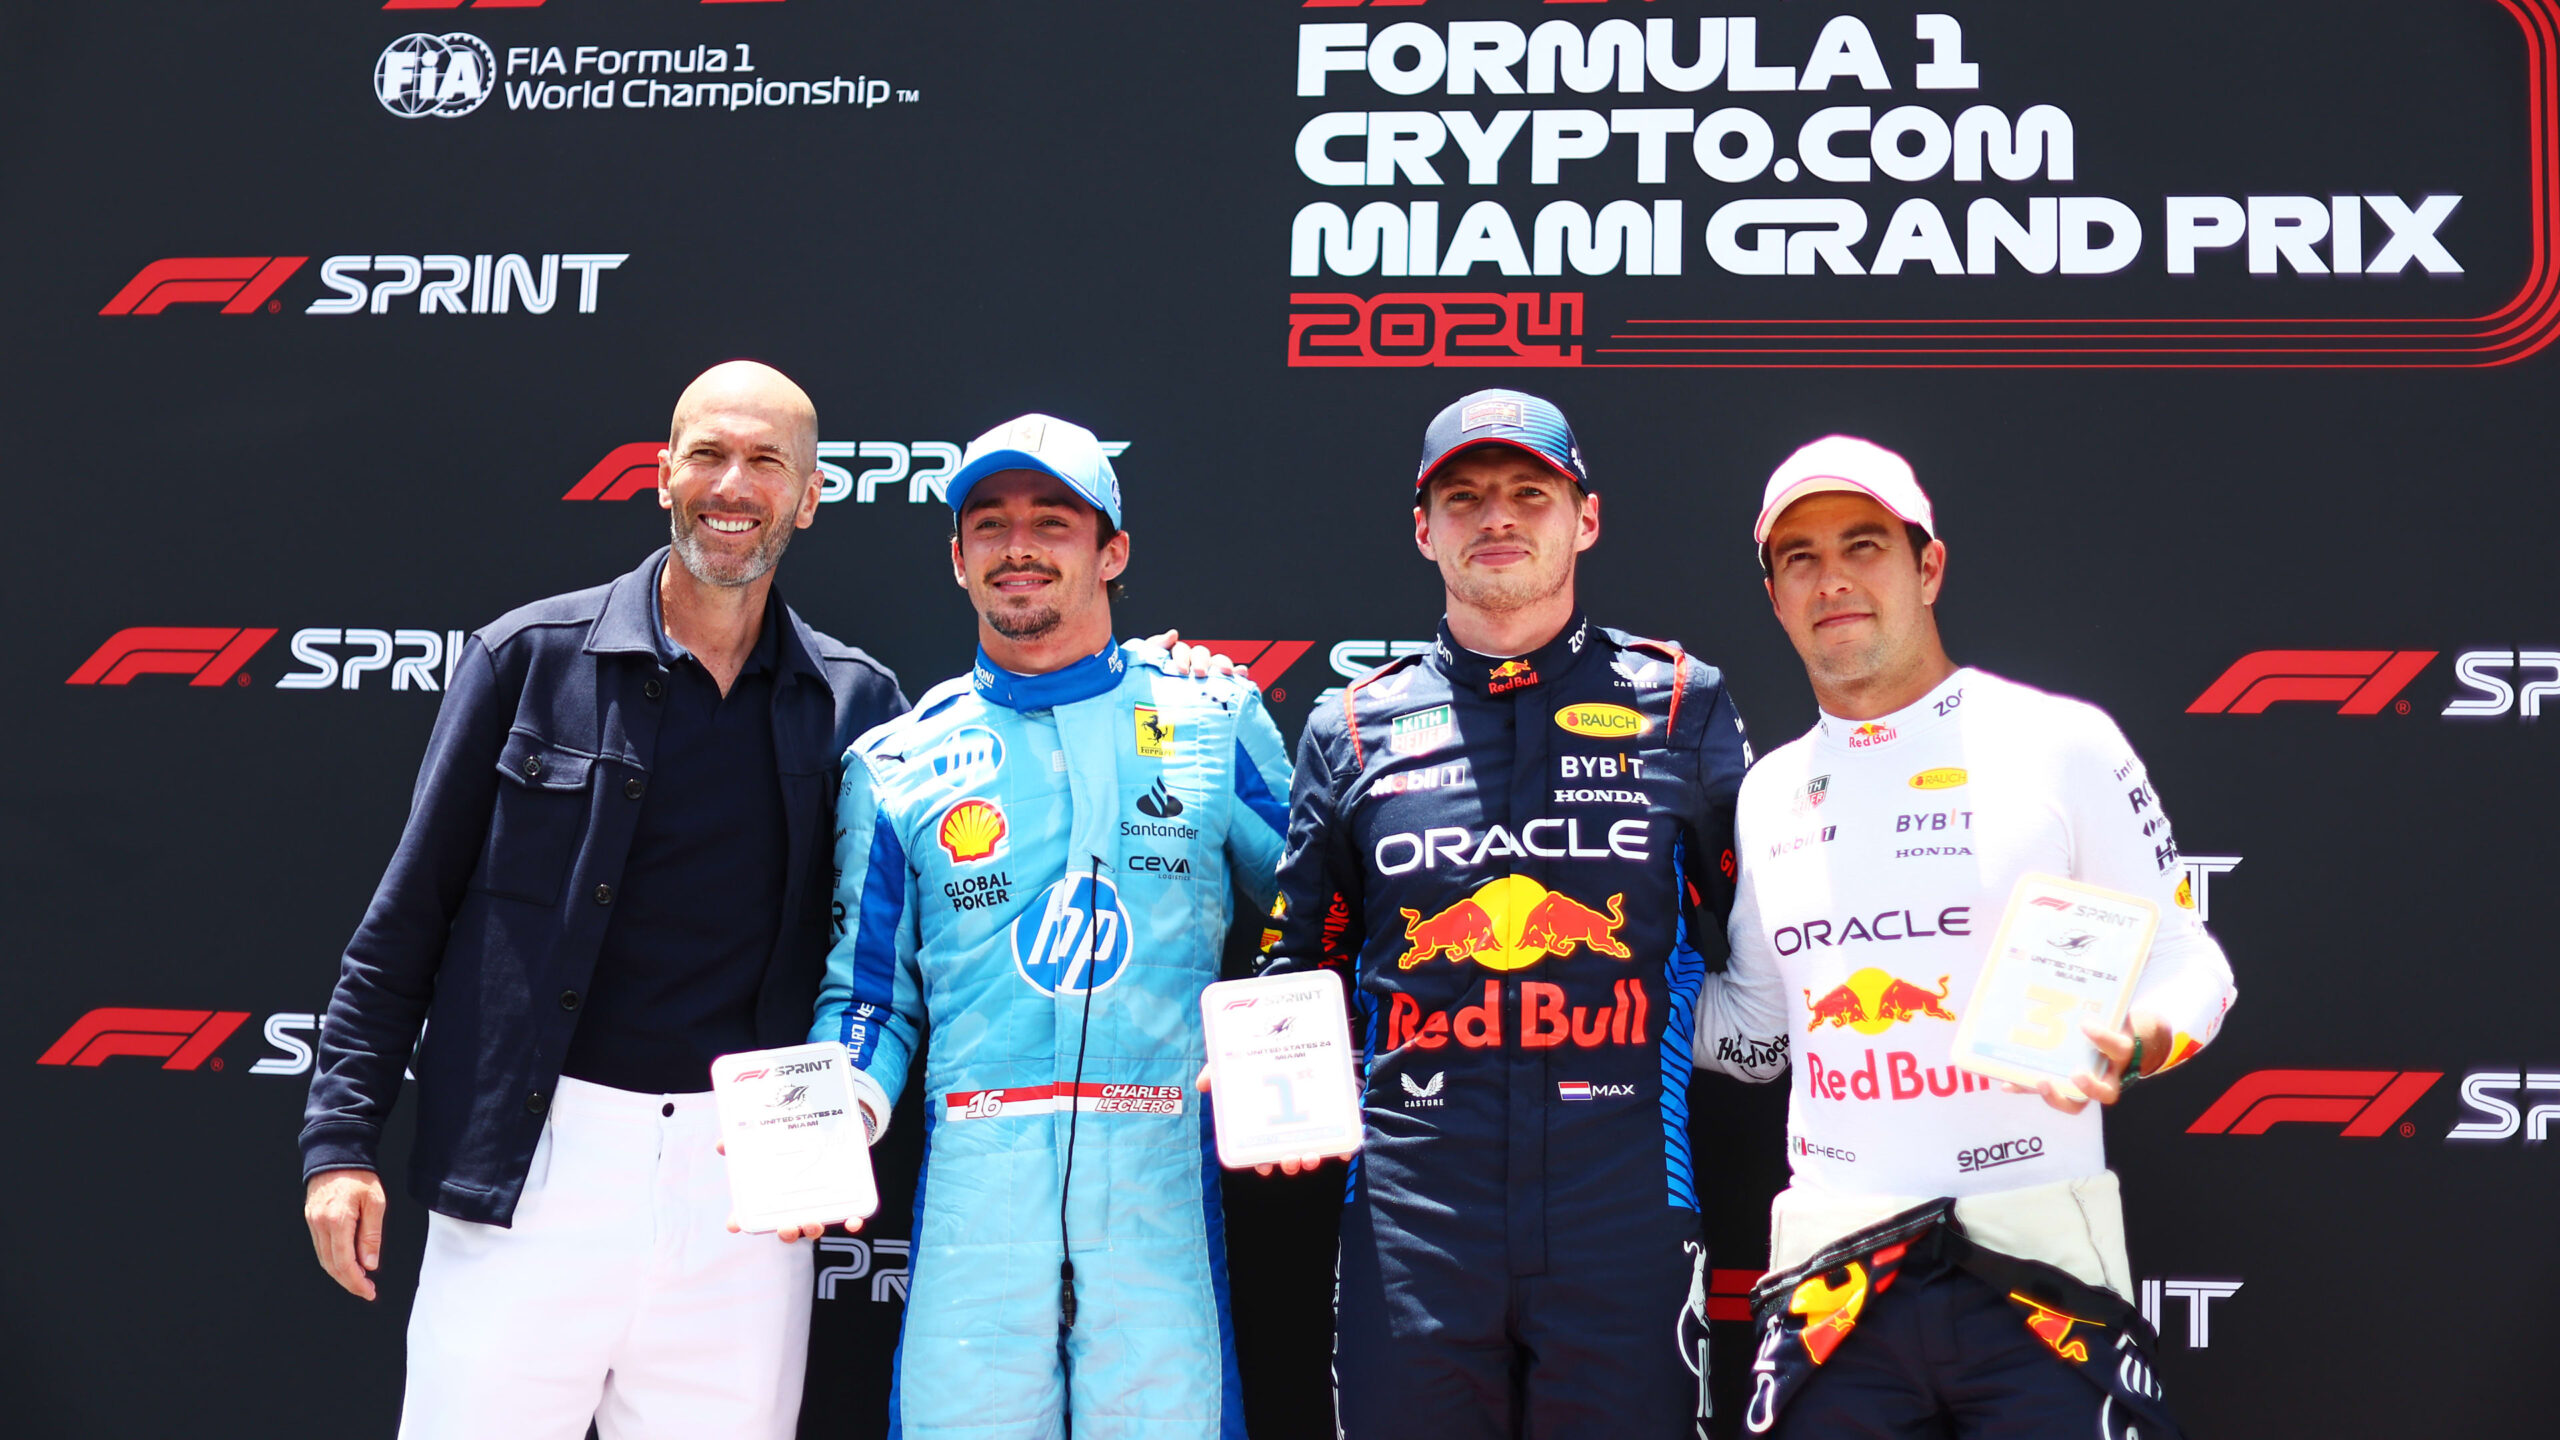 2024 Miami Grand Prix Sprint race report and highlights: Max Verstappen charges to Sprint race win over Charles Leclerc and Sergio Perez in Miami